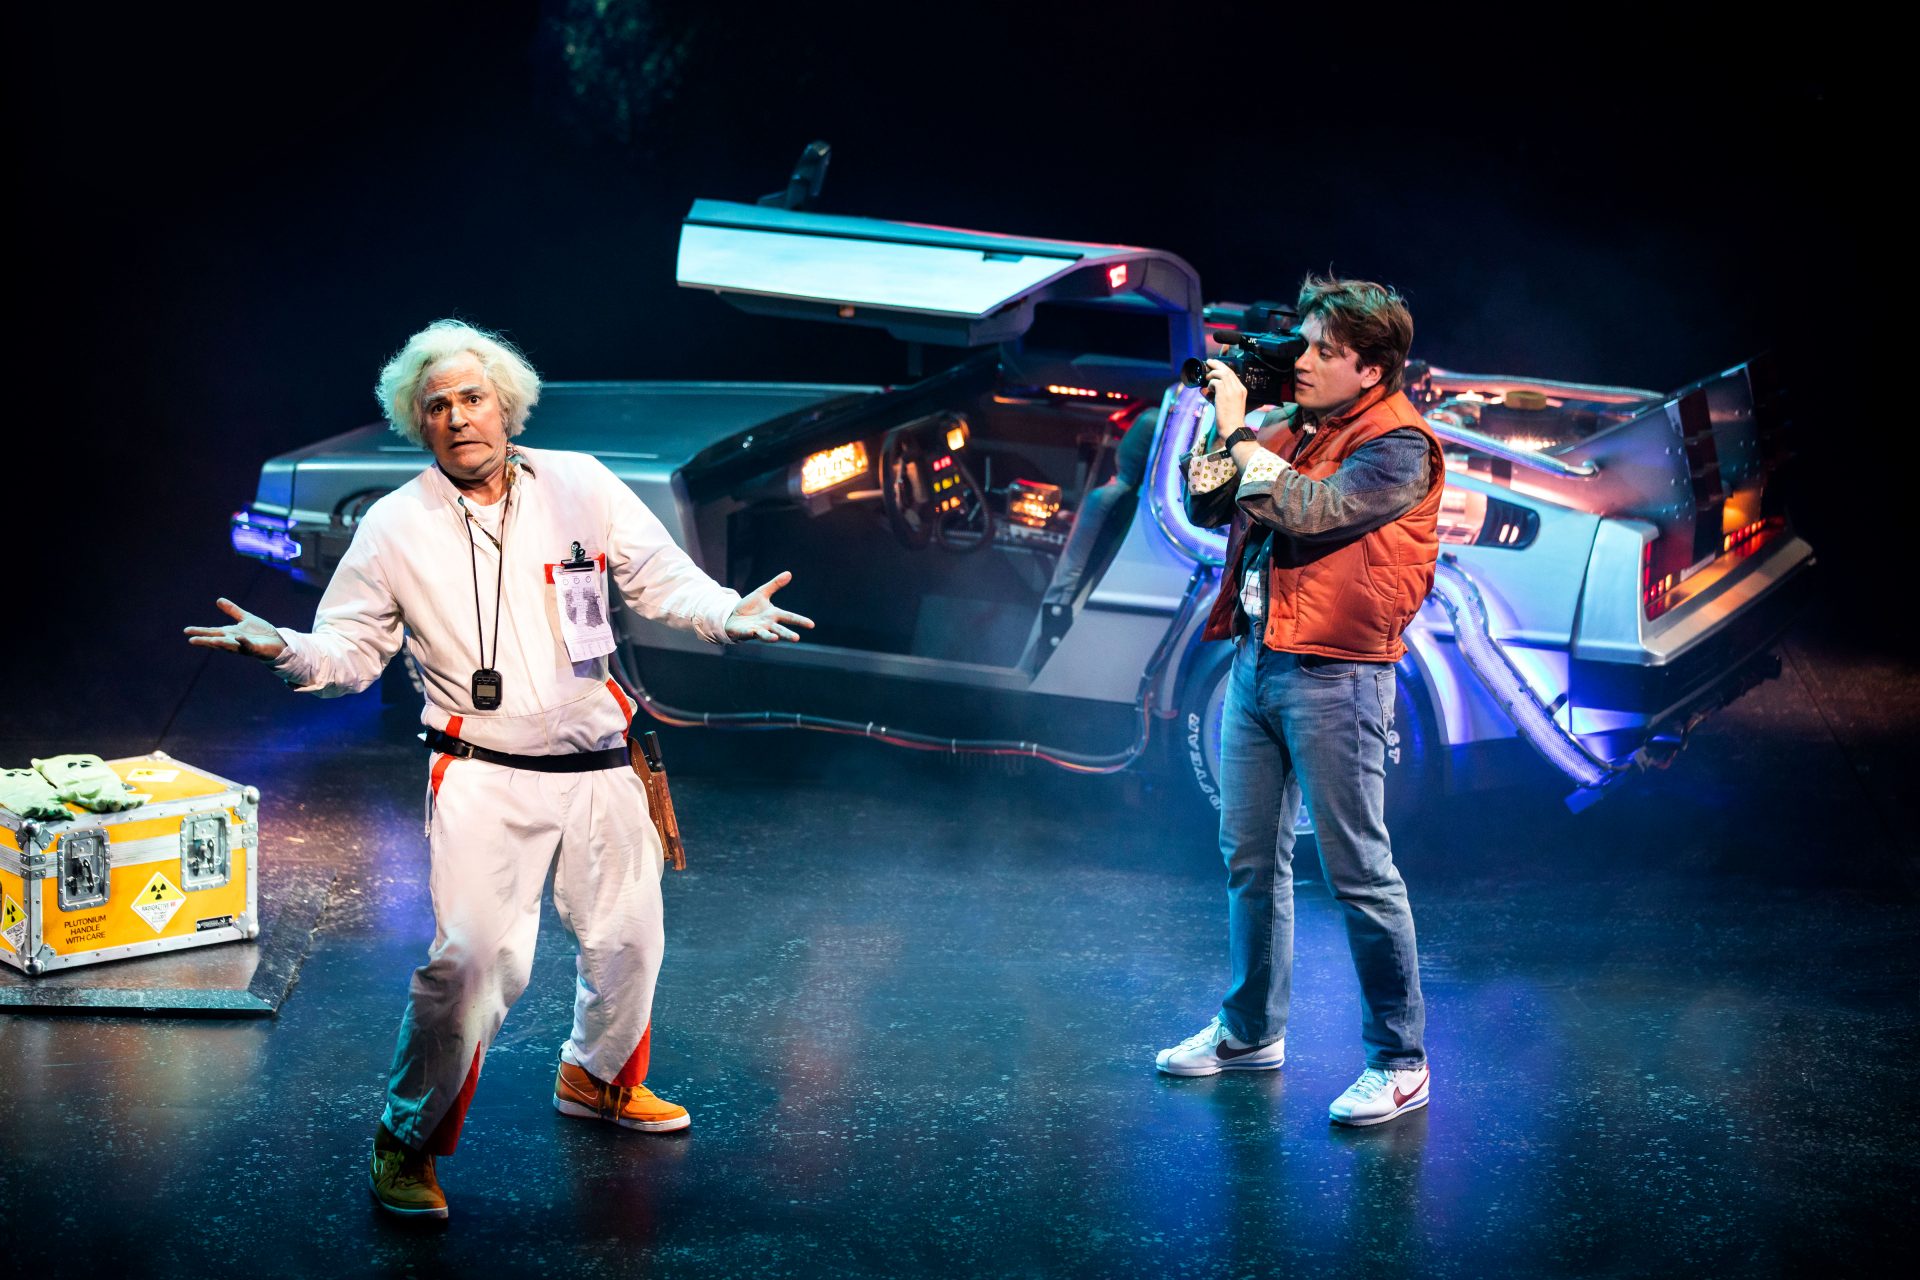 https://www.theneweuropean.co.uk/wp-content/uploads/sites/2/2021/09/Roger-Bart-as-Doc-Brown-Olly-Dobson-as-Marty-McFly-in-Back-to-the-Future-the-Musical-credit-Sean-Ebsworth-Barnes.jpg